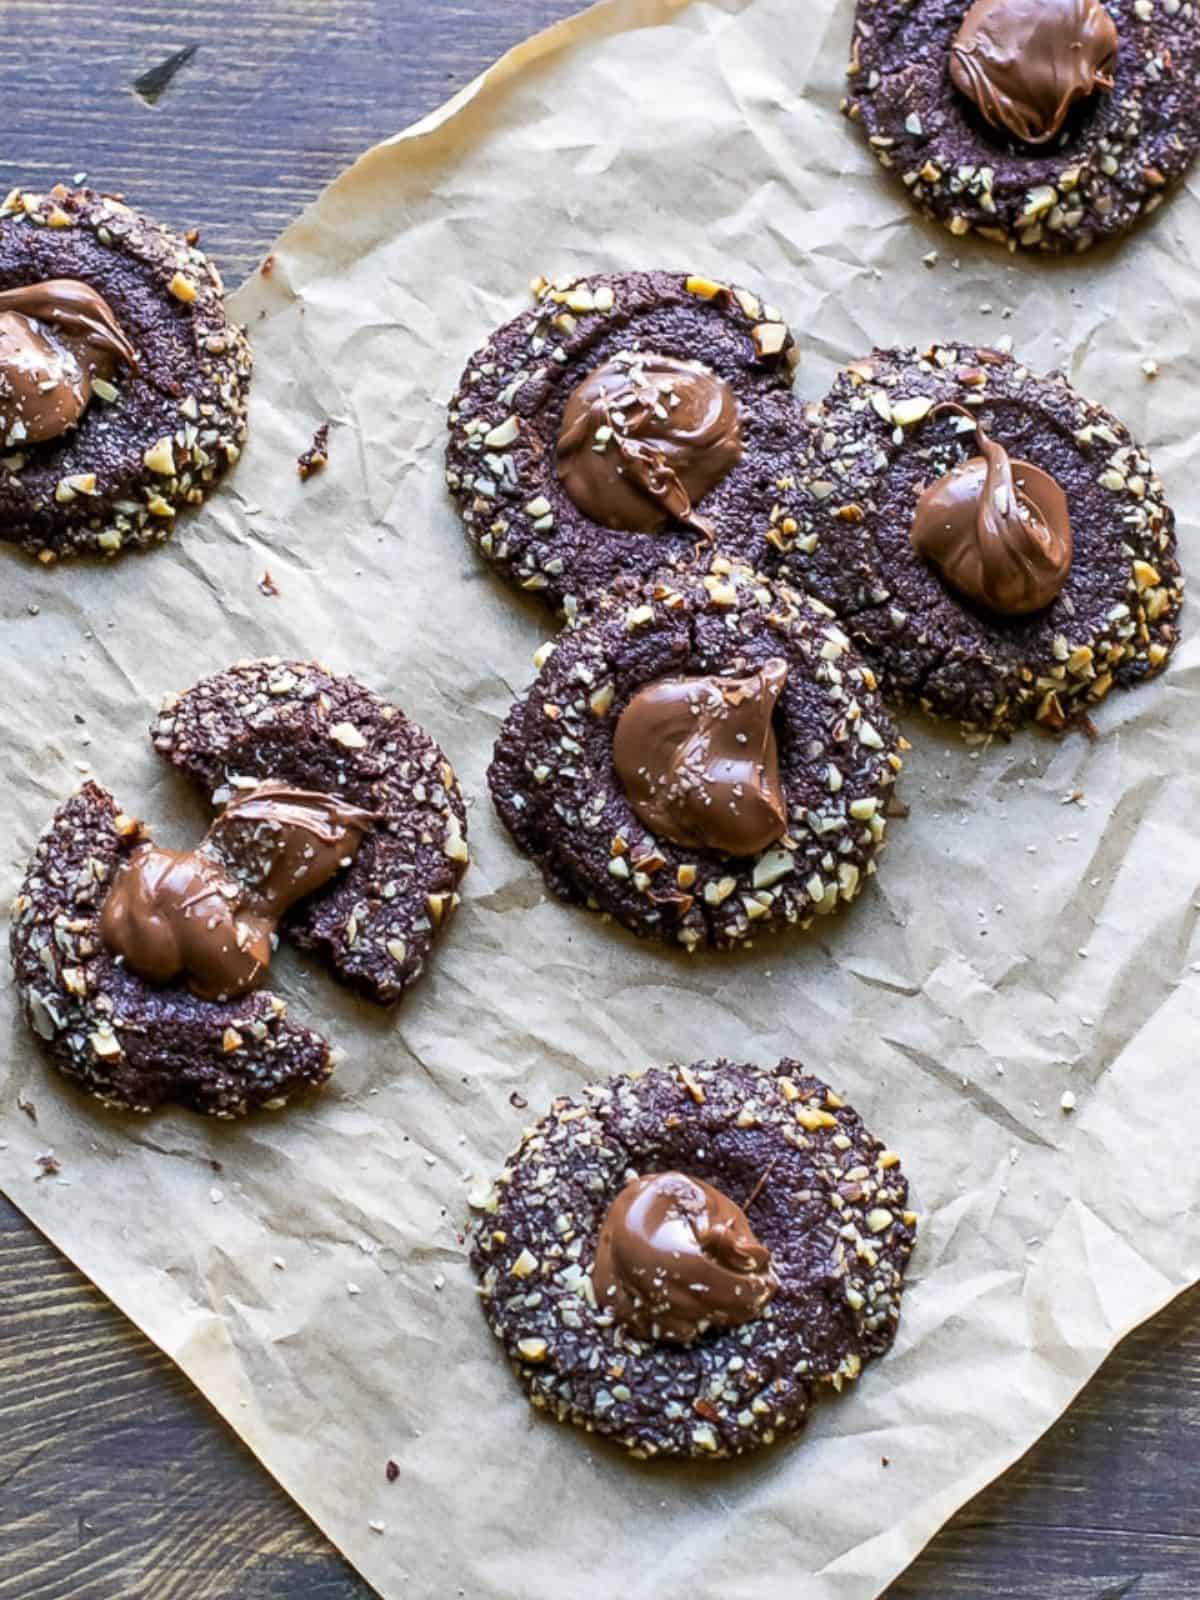 chocolate shortbread Nutella thumbprint cookies made with creamy Nutella spread, baked hazelnuts, and Nutella spread.